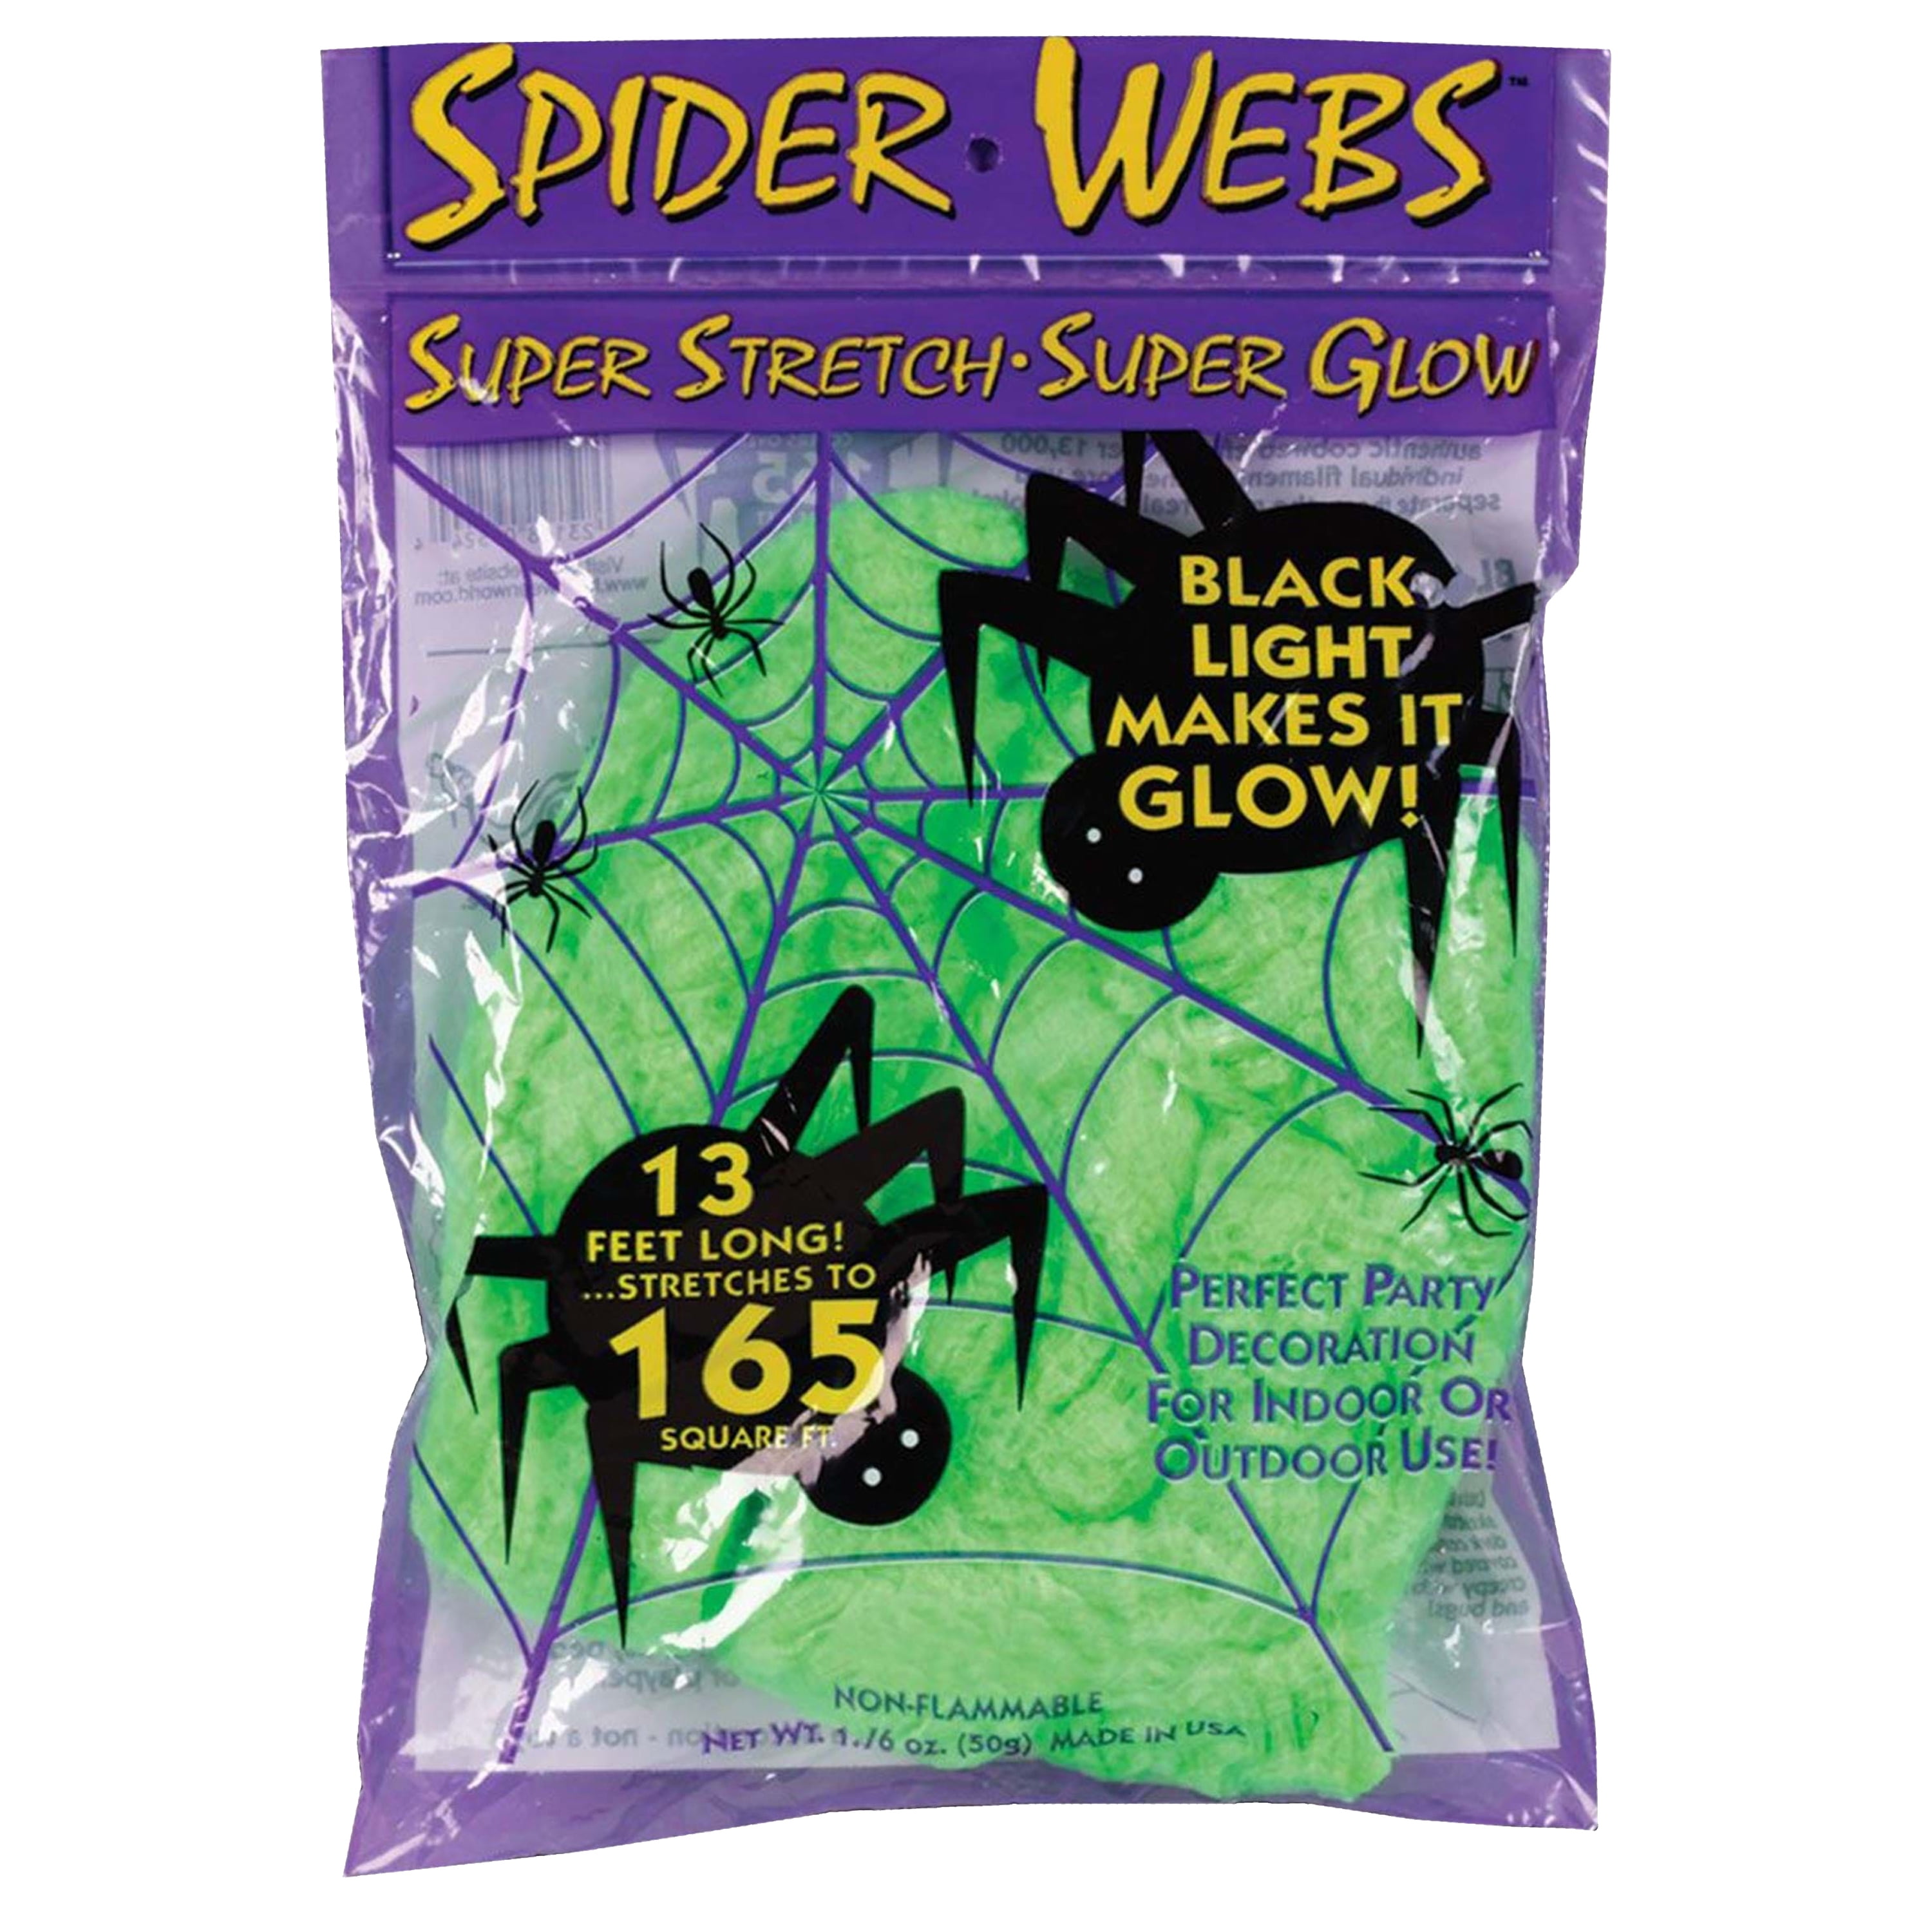 FUN WORLD* Bag SPIDER WEB White HALLOWEEN Stretches To 200 sq ft PARTY DECOR New 